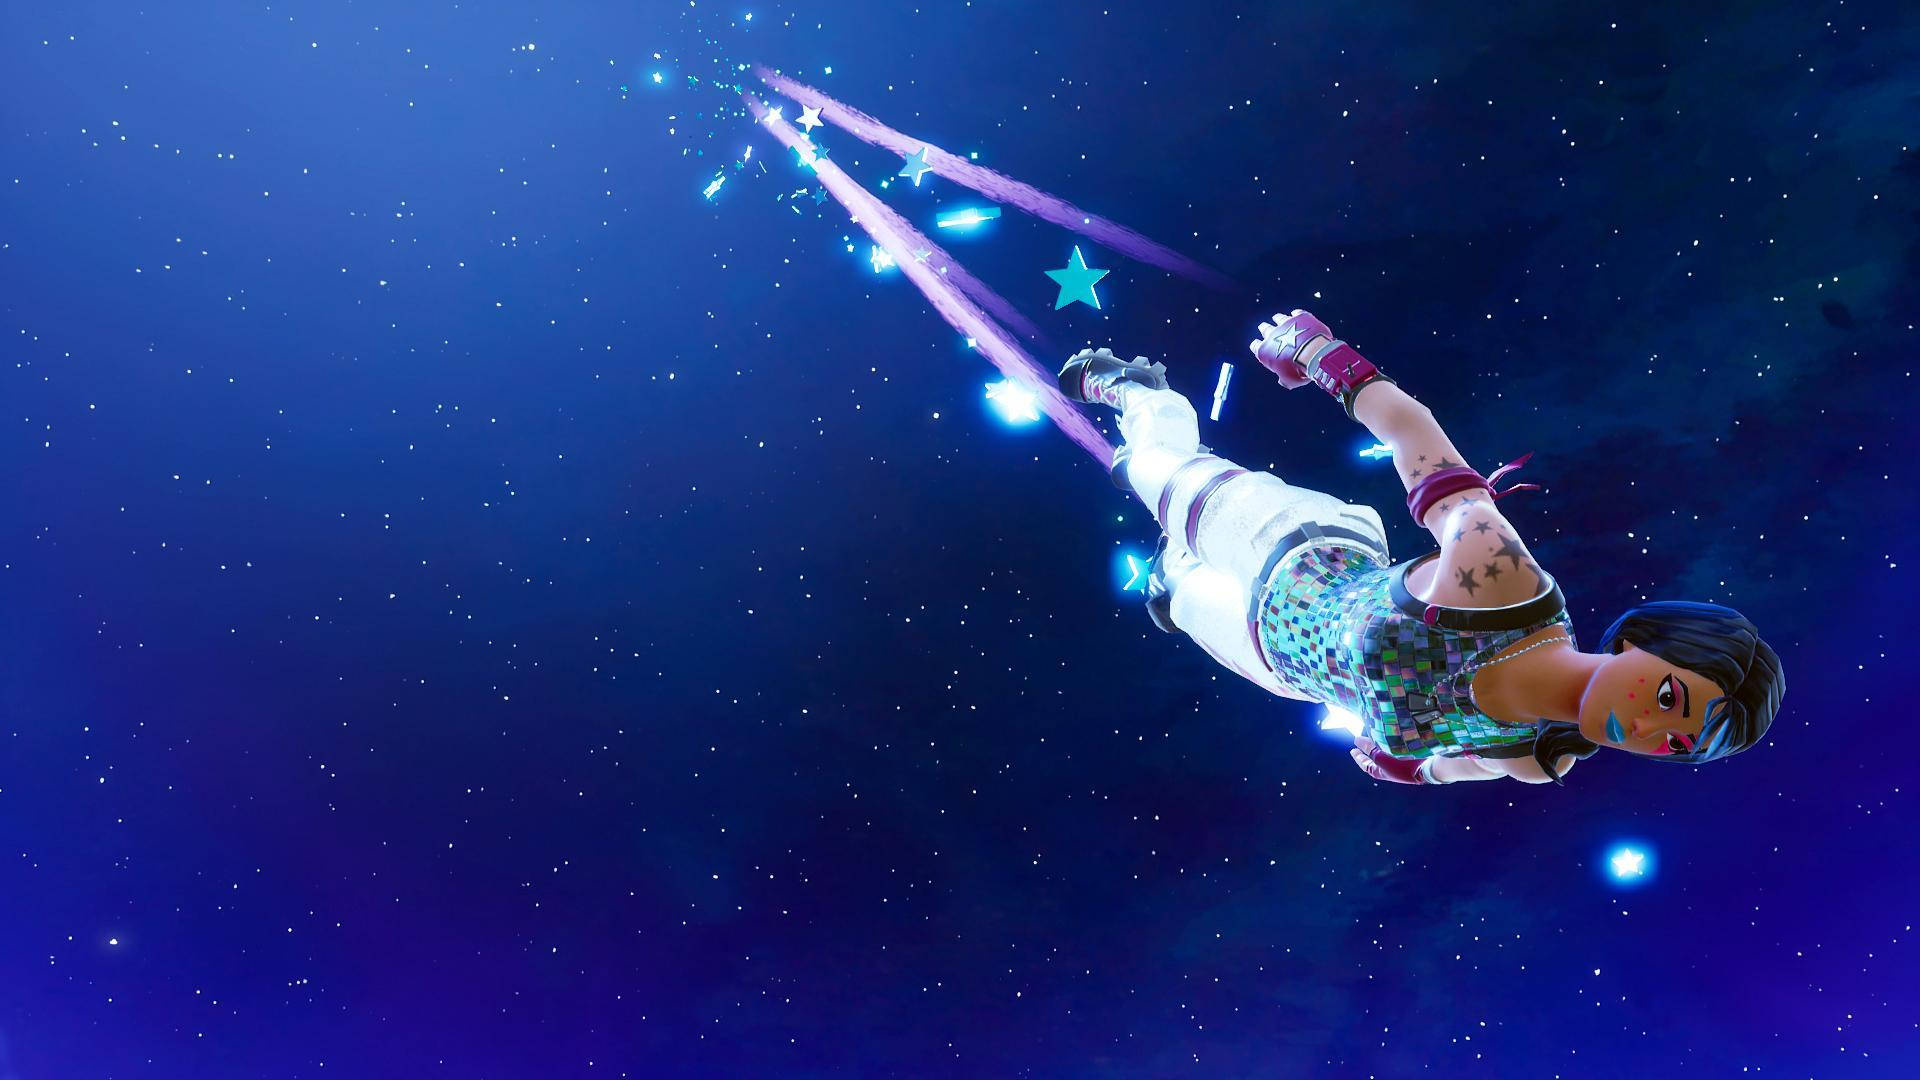 The Sparkle Specialist is raring to go in Fortnite Wallpaper